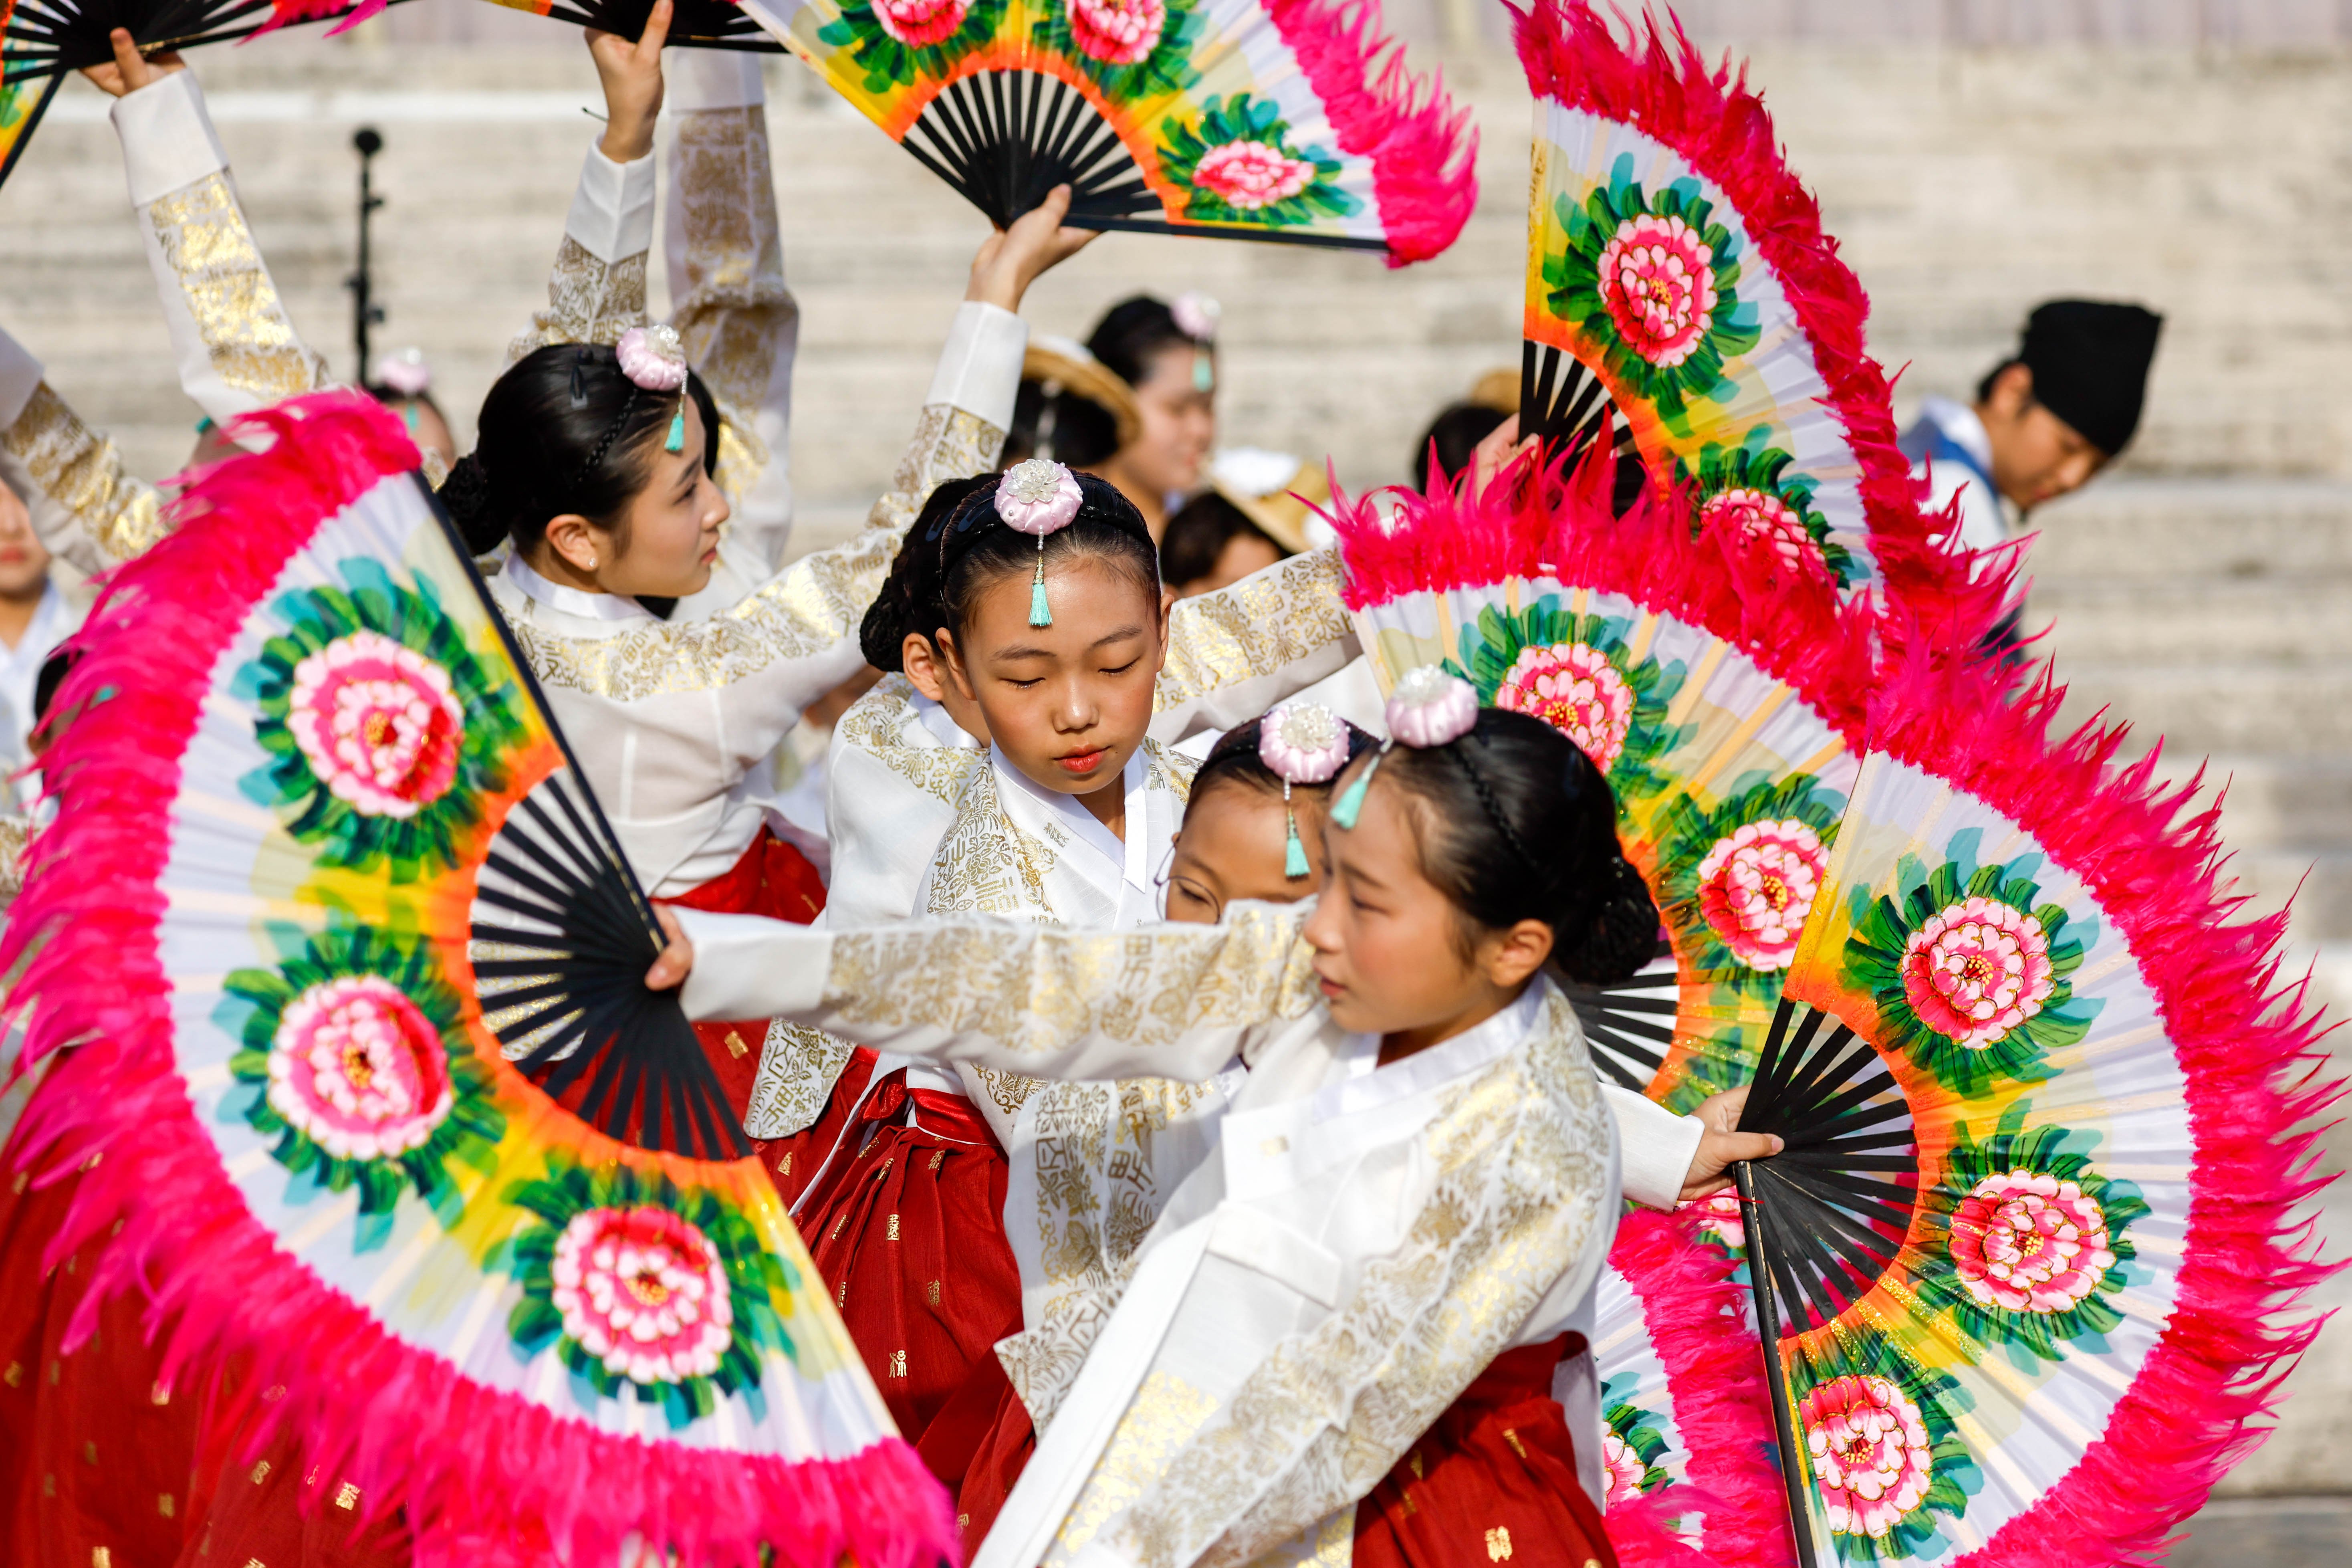 A troupe of dancers from South Korea performs in St. Peter's Square.